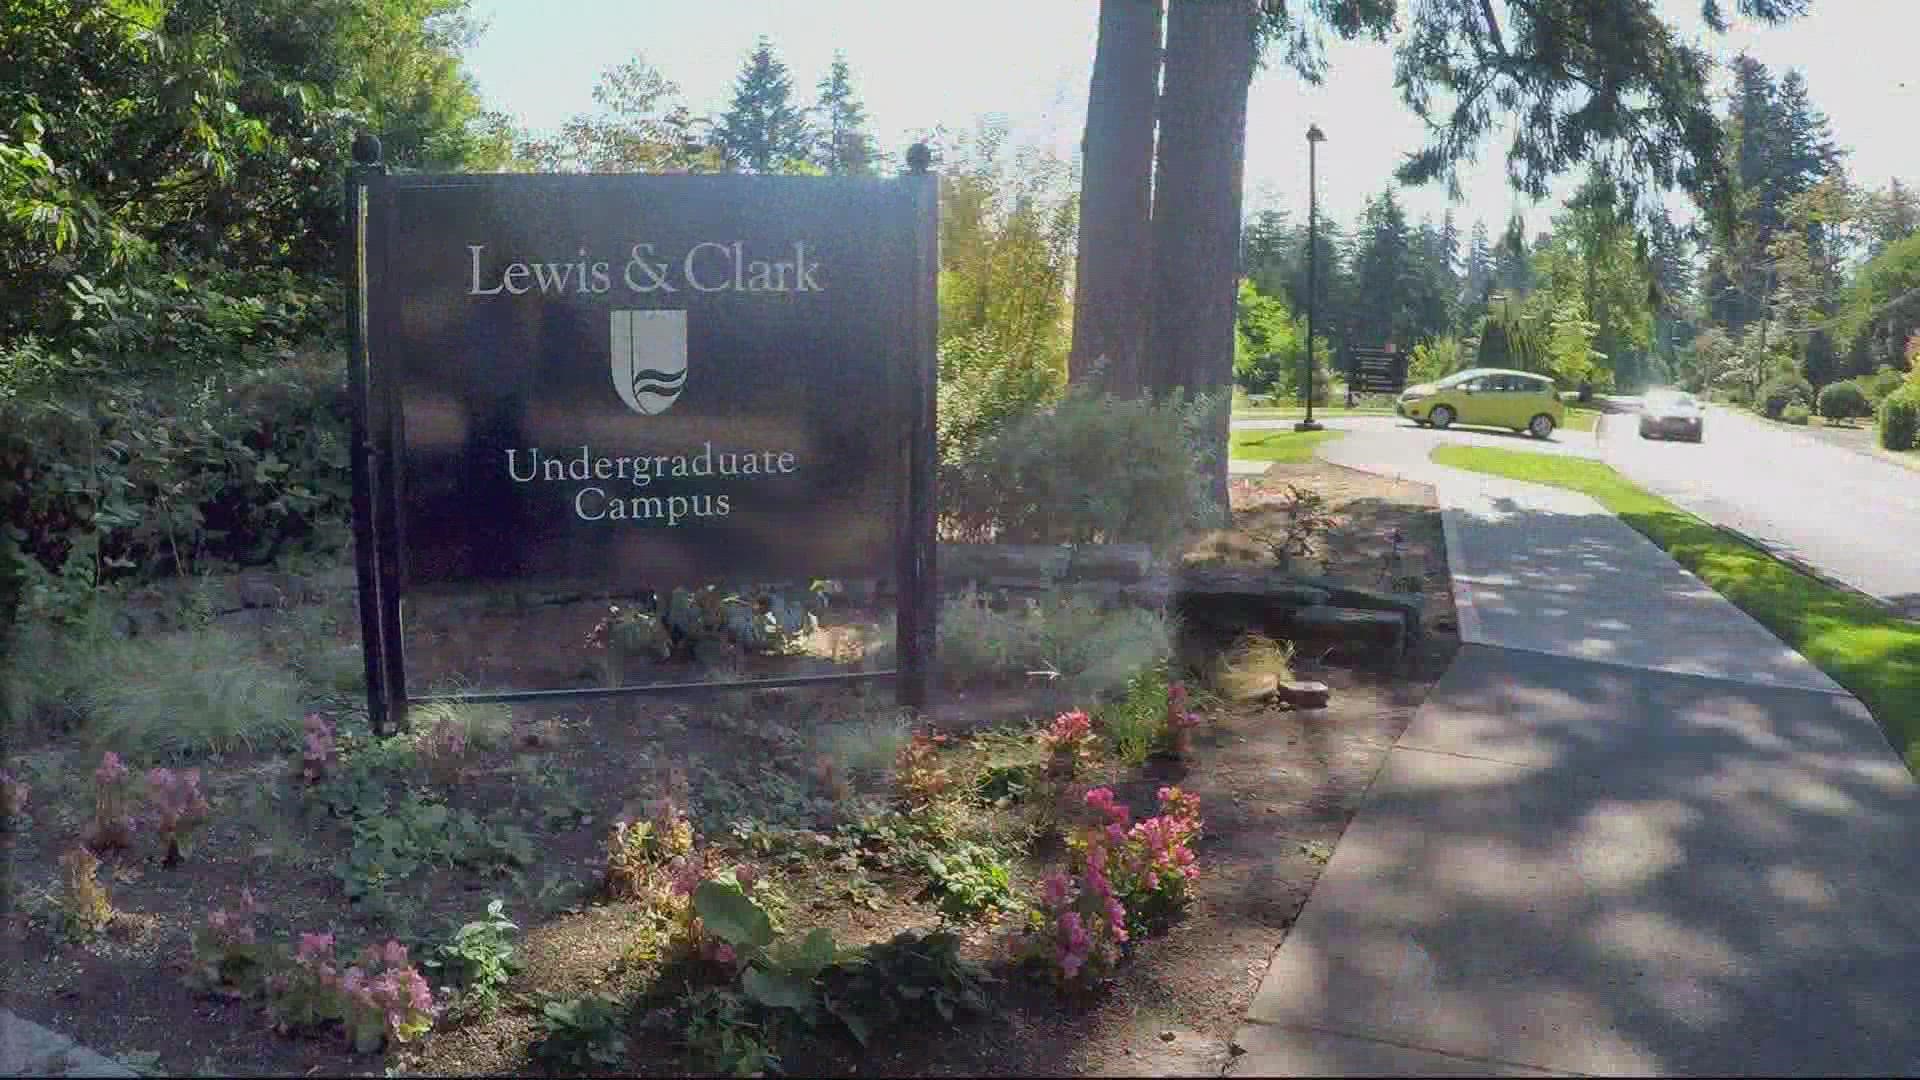 A 19-year-old man was killed and two 18-year-old women were injured when a brick column collapsed at Lewis & Clark College in Southwest Portland.